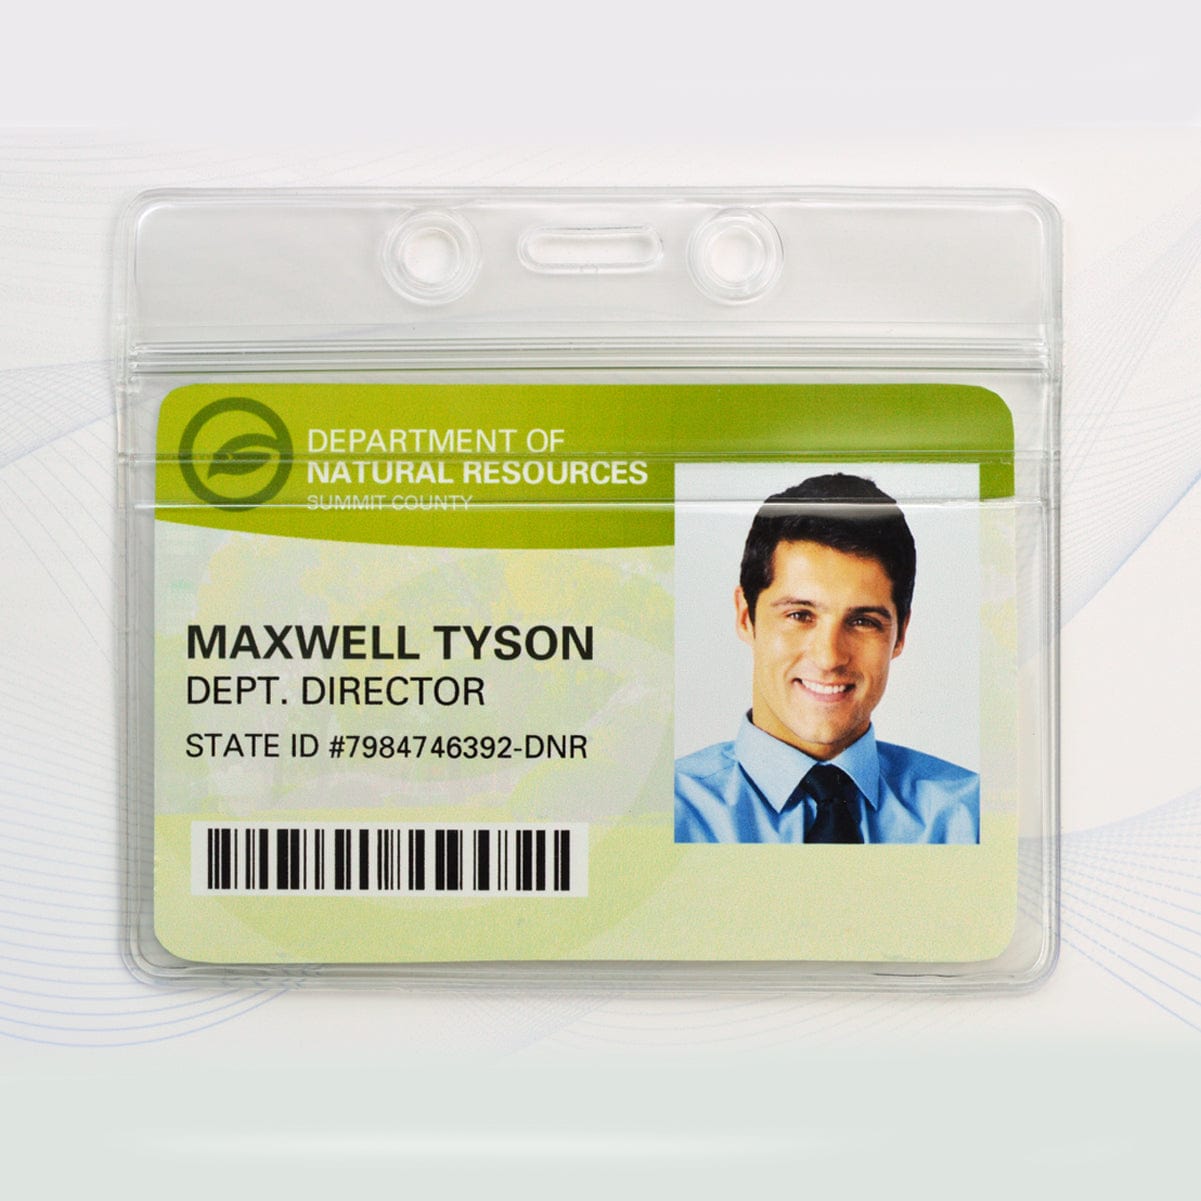 Department of Natural Resources ID badge with a photo of a man, labeled "Maxwell Tyson, Dept. Director," and including state ID number #7984746392-DNR. The badge is securely placed in a Horizontal Vinyl Badge Holder with Zipper Top (506-ZHOS-CLR) for enhanced ID card protection.